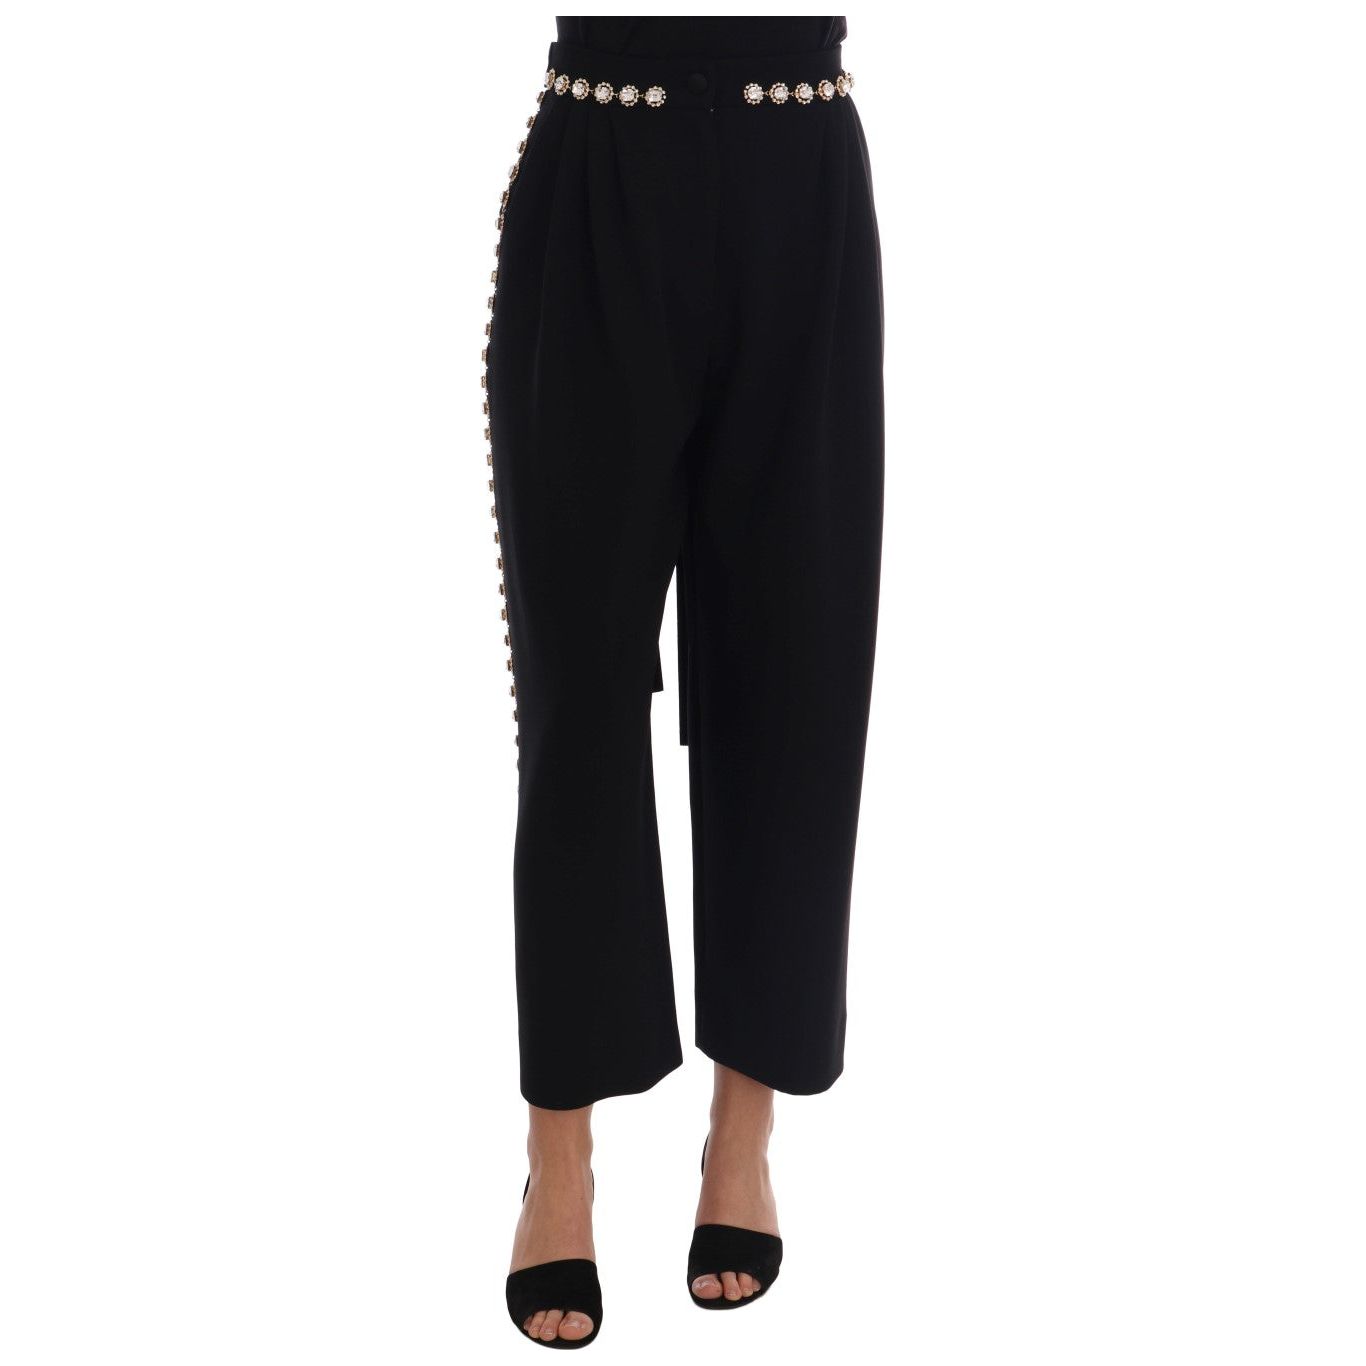 Dolce & Gabbana Elegant High-Waist Ankle Pants with Gold Detailing Jeans & Pants black-wool-stretch-crystal-pants 513120-black-wool-stretch-crystal-pants.jpg